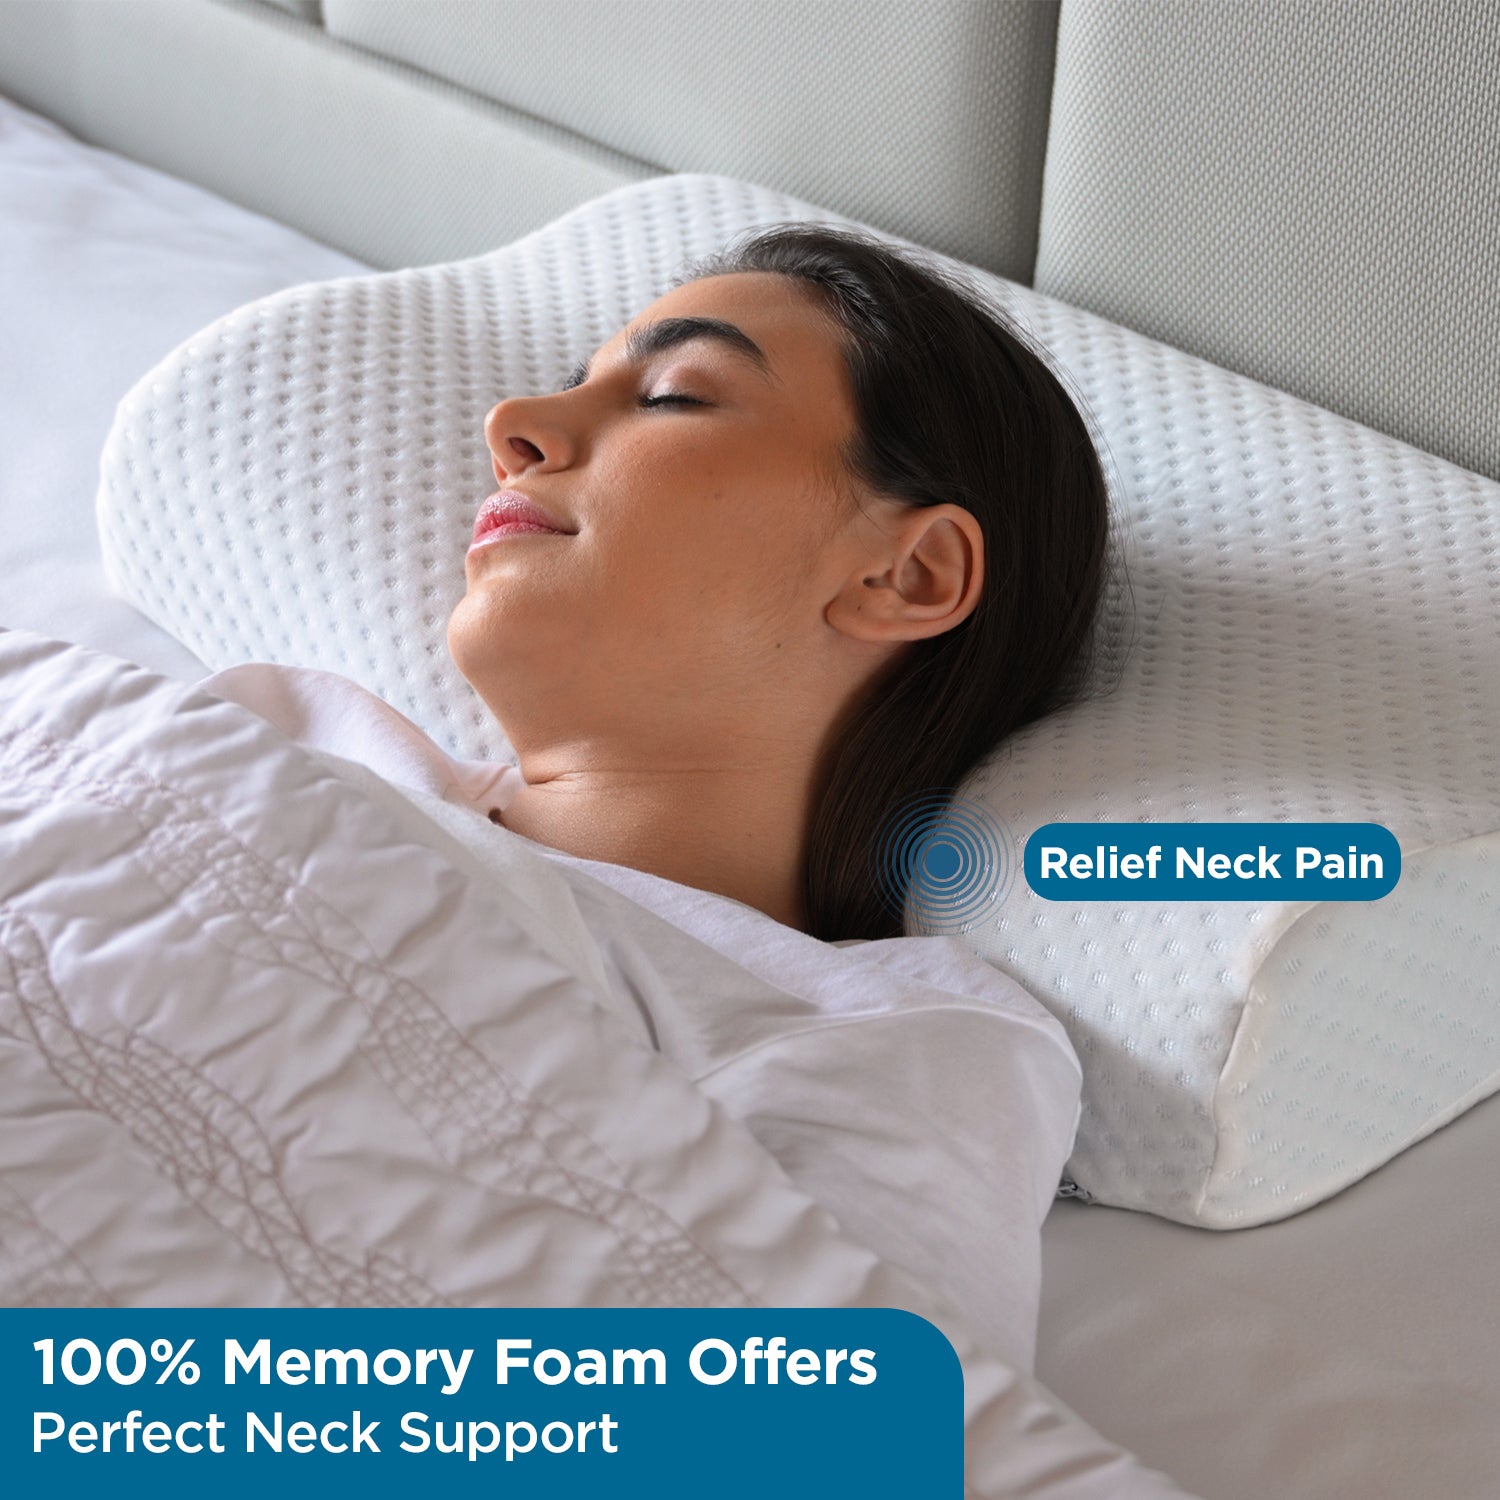 Orthopedic Gel Infused Ventilated Memory Foam Cervical Contour Pillow